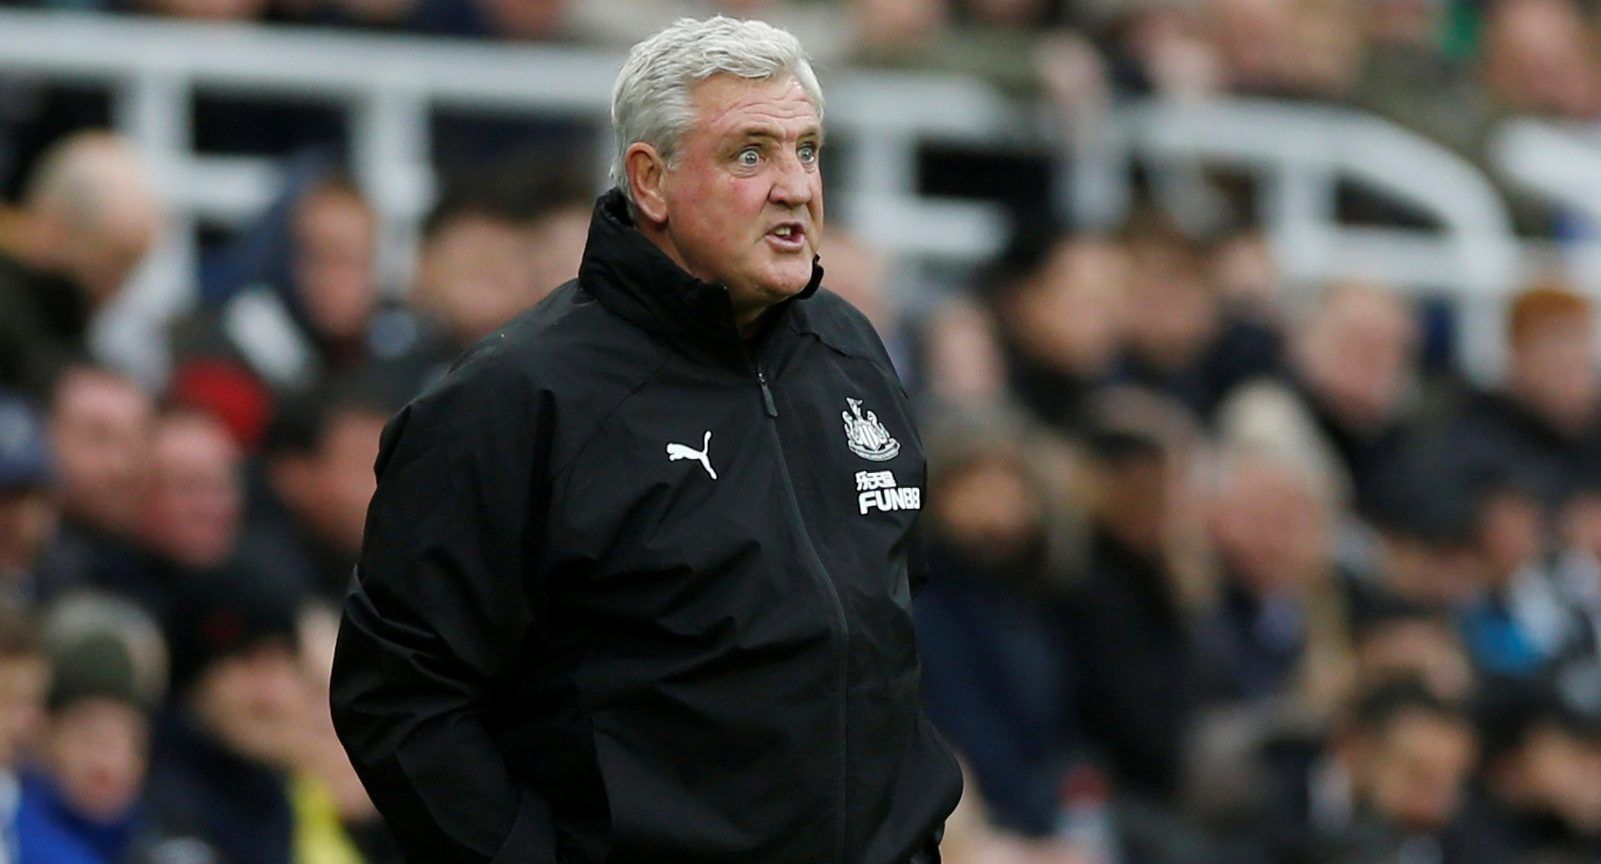 Soccer Football - Premier League - Newcastle United v Manchester United - St James' Park, Newcastle, Britain - October 6, 2019  Newcastle United manager Steve Bruce reacts  Action Images via Reuters/Lee Smith  EDITORIAL USE ONLY. No use with unauthorized audio, video, data, fixture lists, club/league logos or 